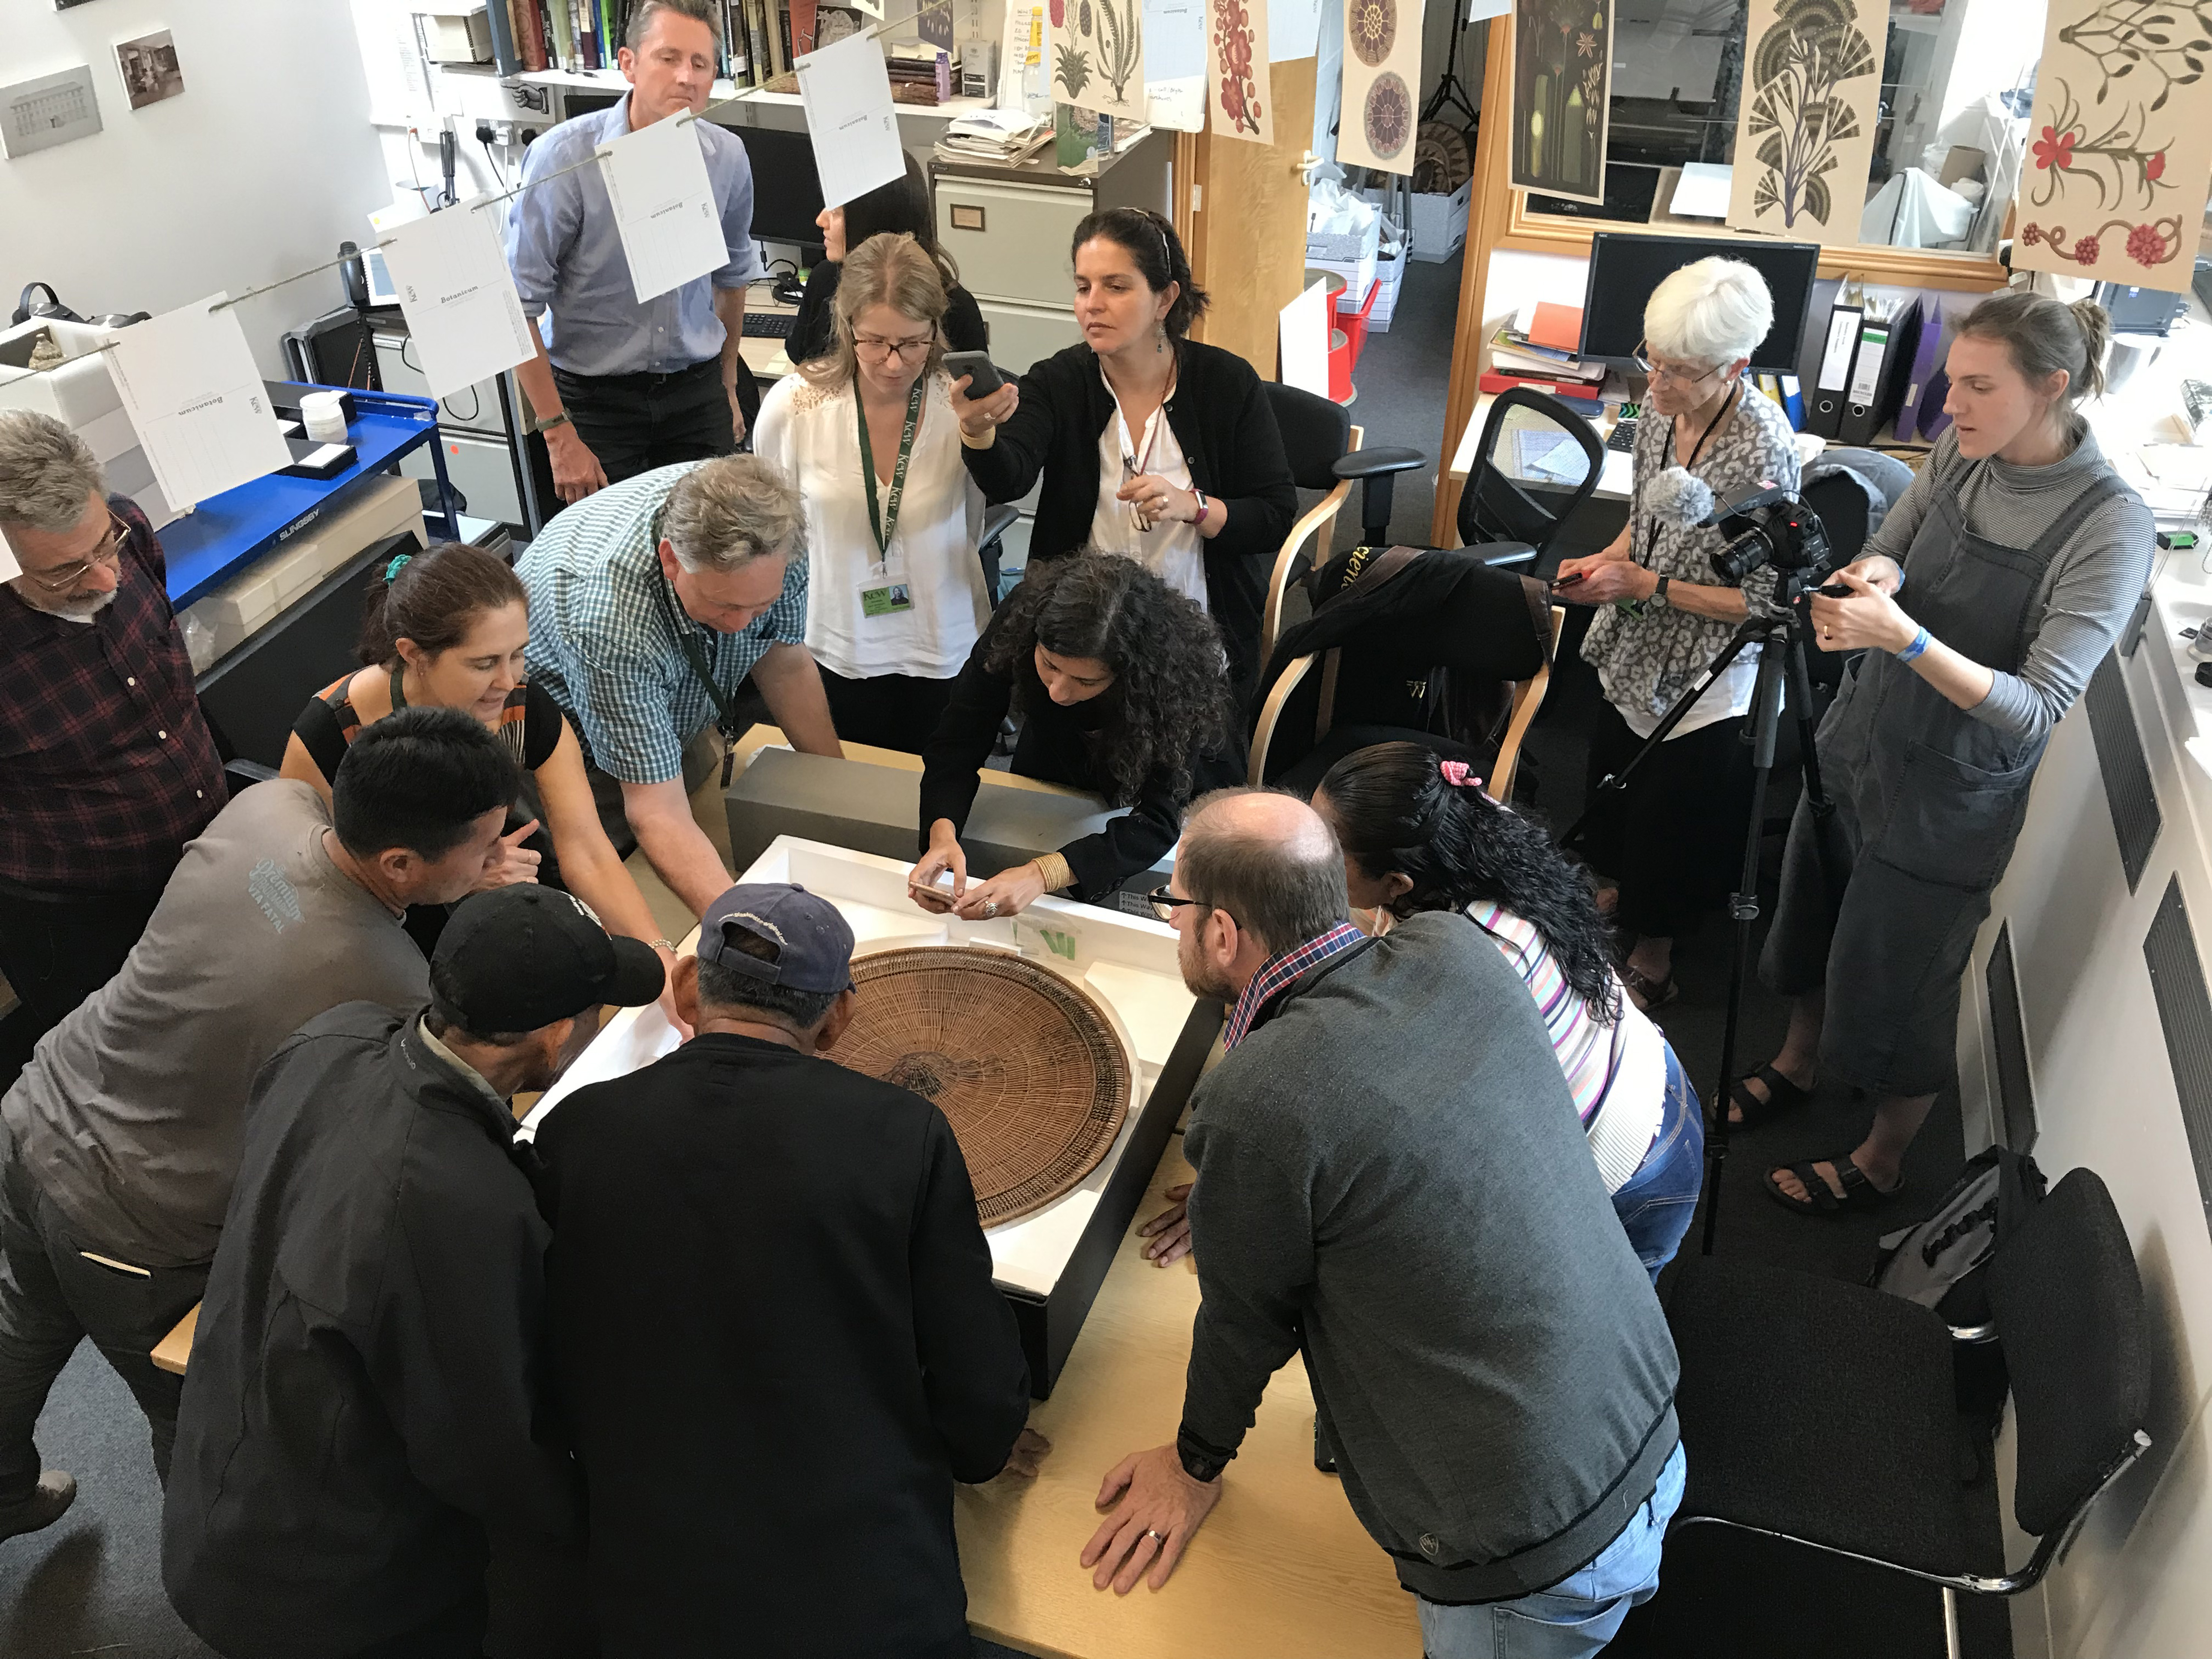 Indigenous visitors from the upper Rio Negro examine 19th-century artefacts from Amazonia at a transnational and interdisciplinary workshop at Kew in 2019